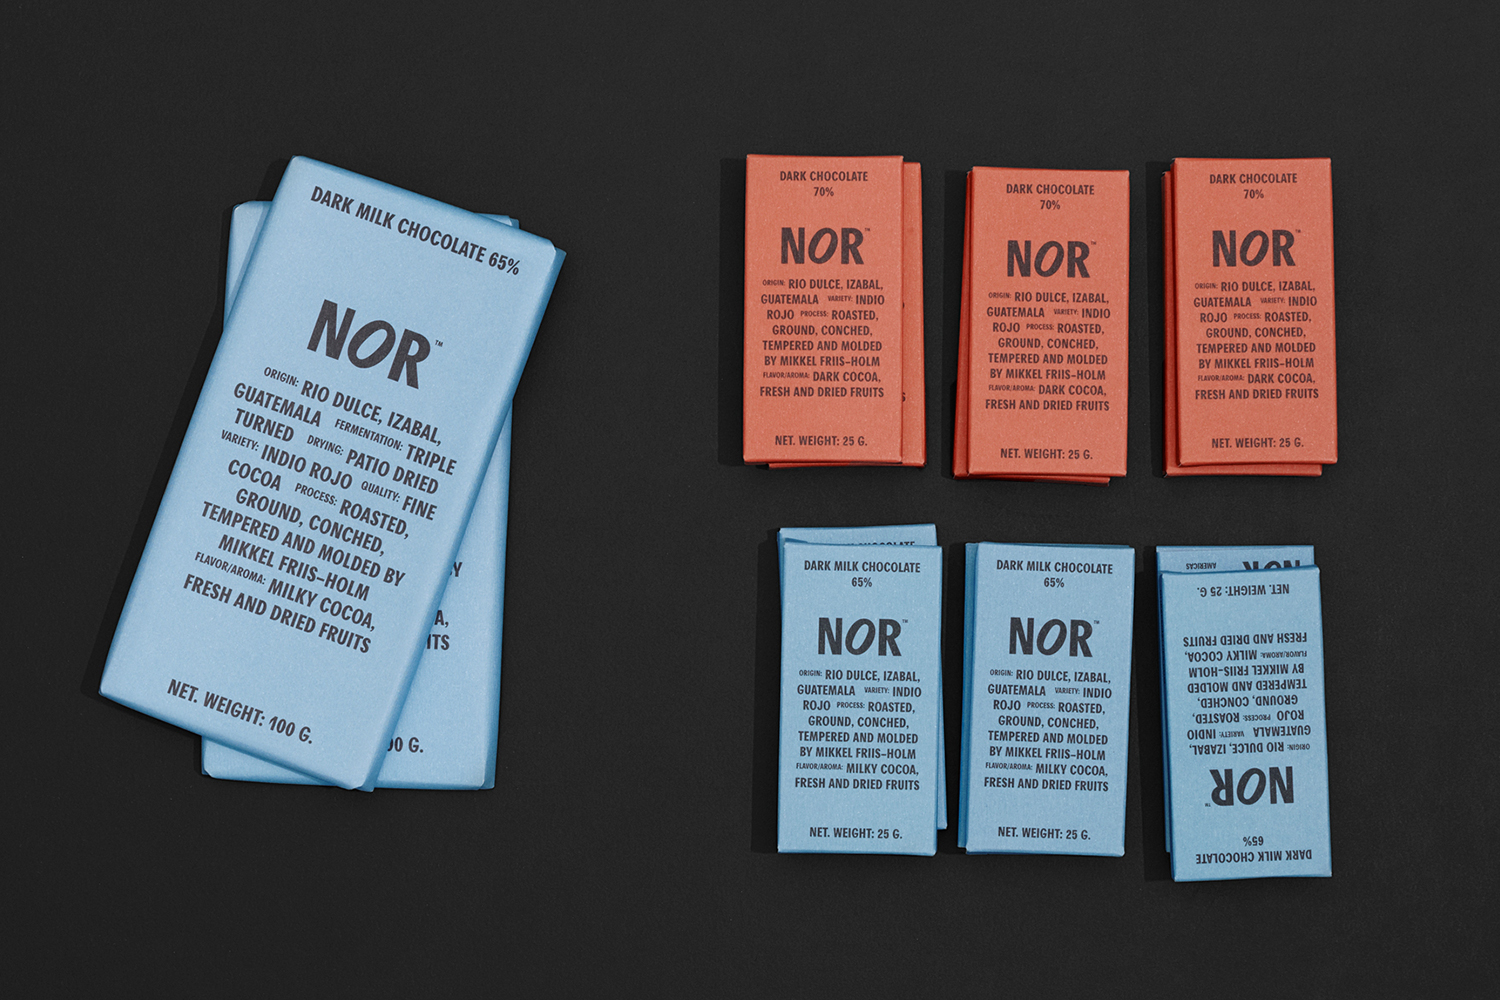 Logo, branding and packaging designed by Danish studio Re-public for coffee and cocoa specialists NOR